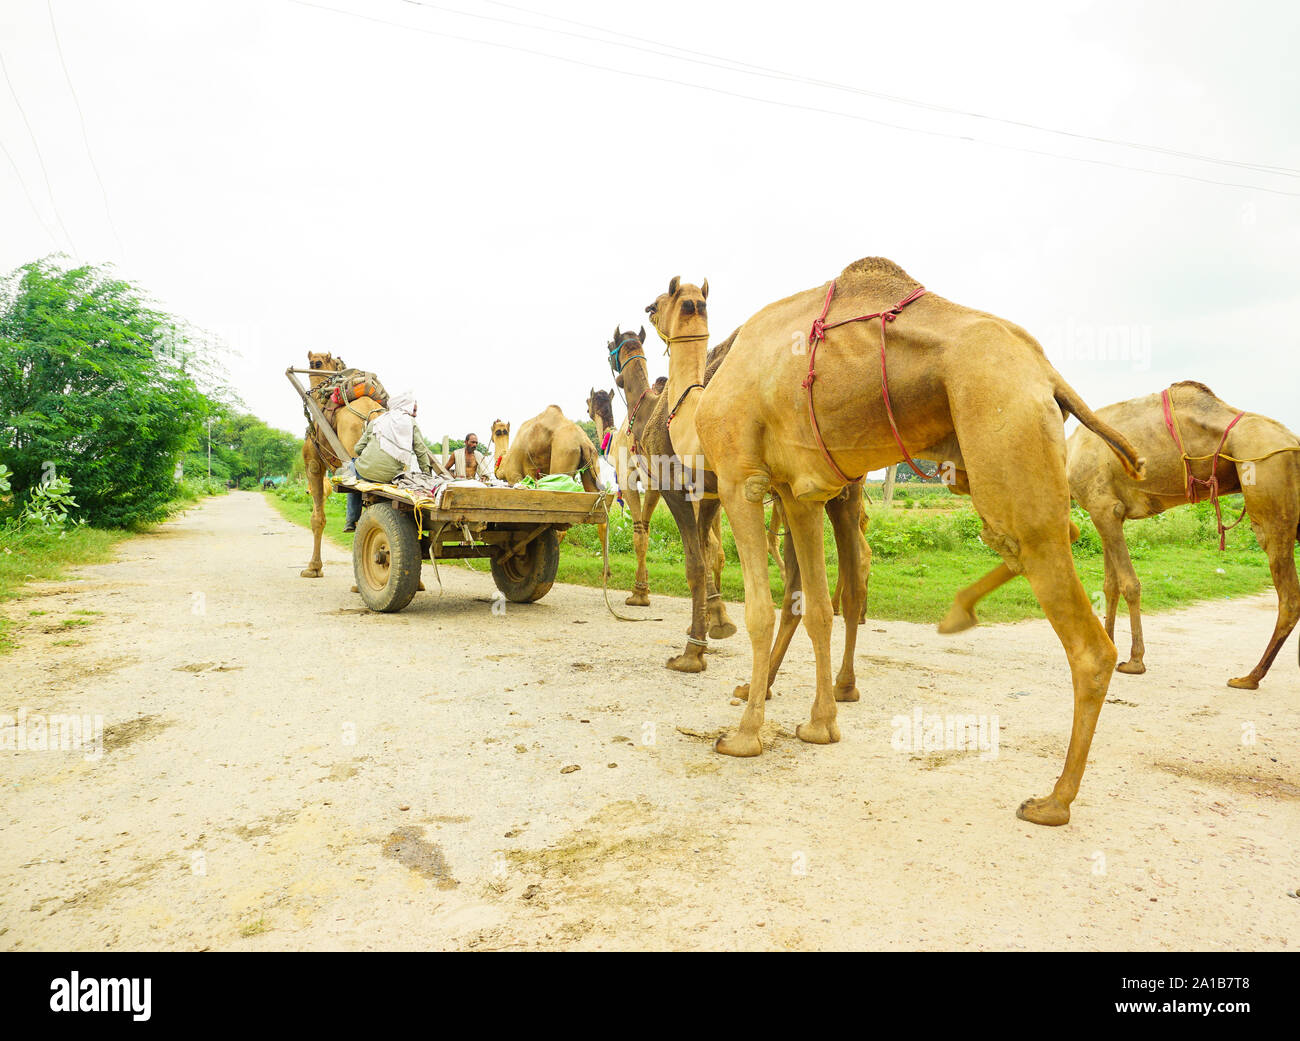 india - utter pradesh - mathura - september 15, 2019, on village street some camels are hauled by a camel cart Stock Photo